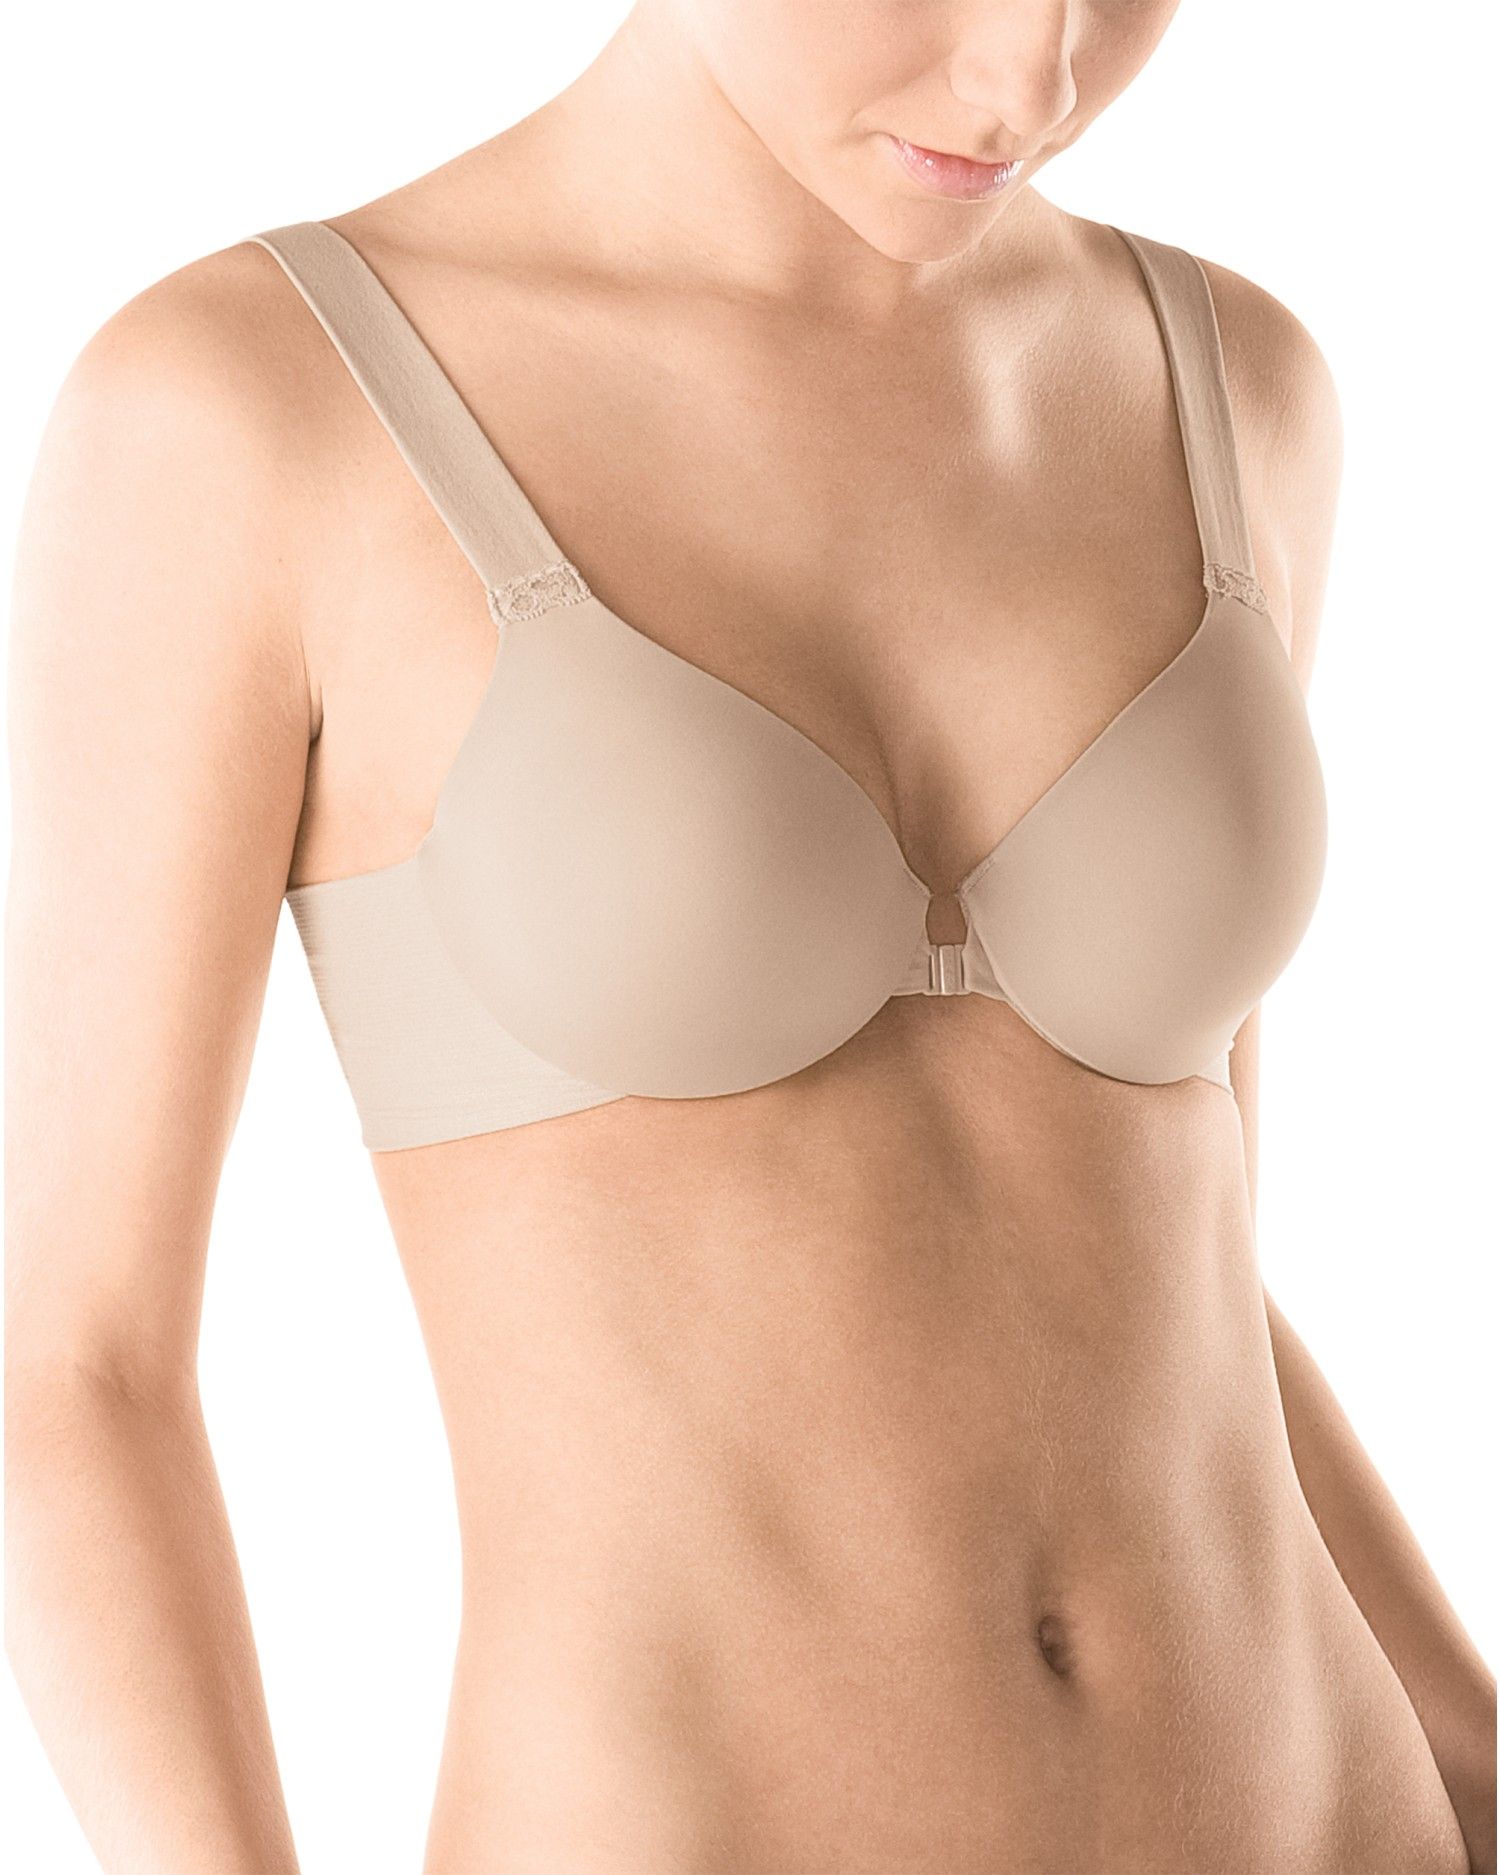 Spanx Bra-llelujah Full Coverage Bra Review, Price and Features